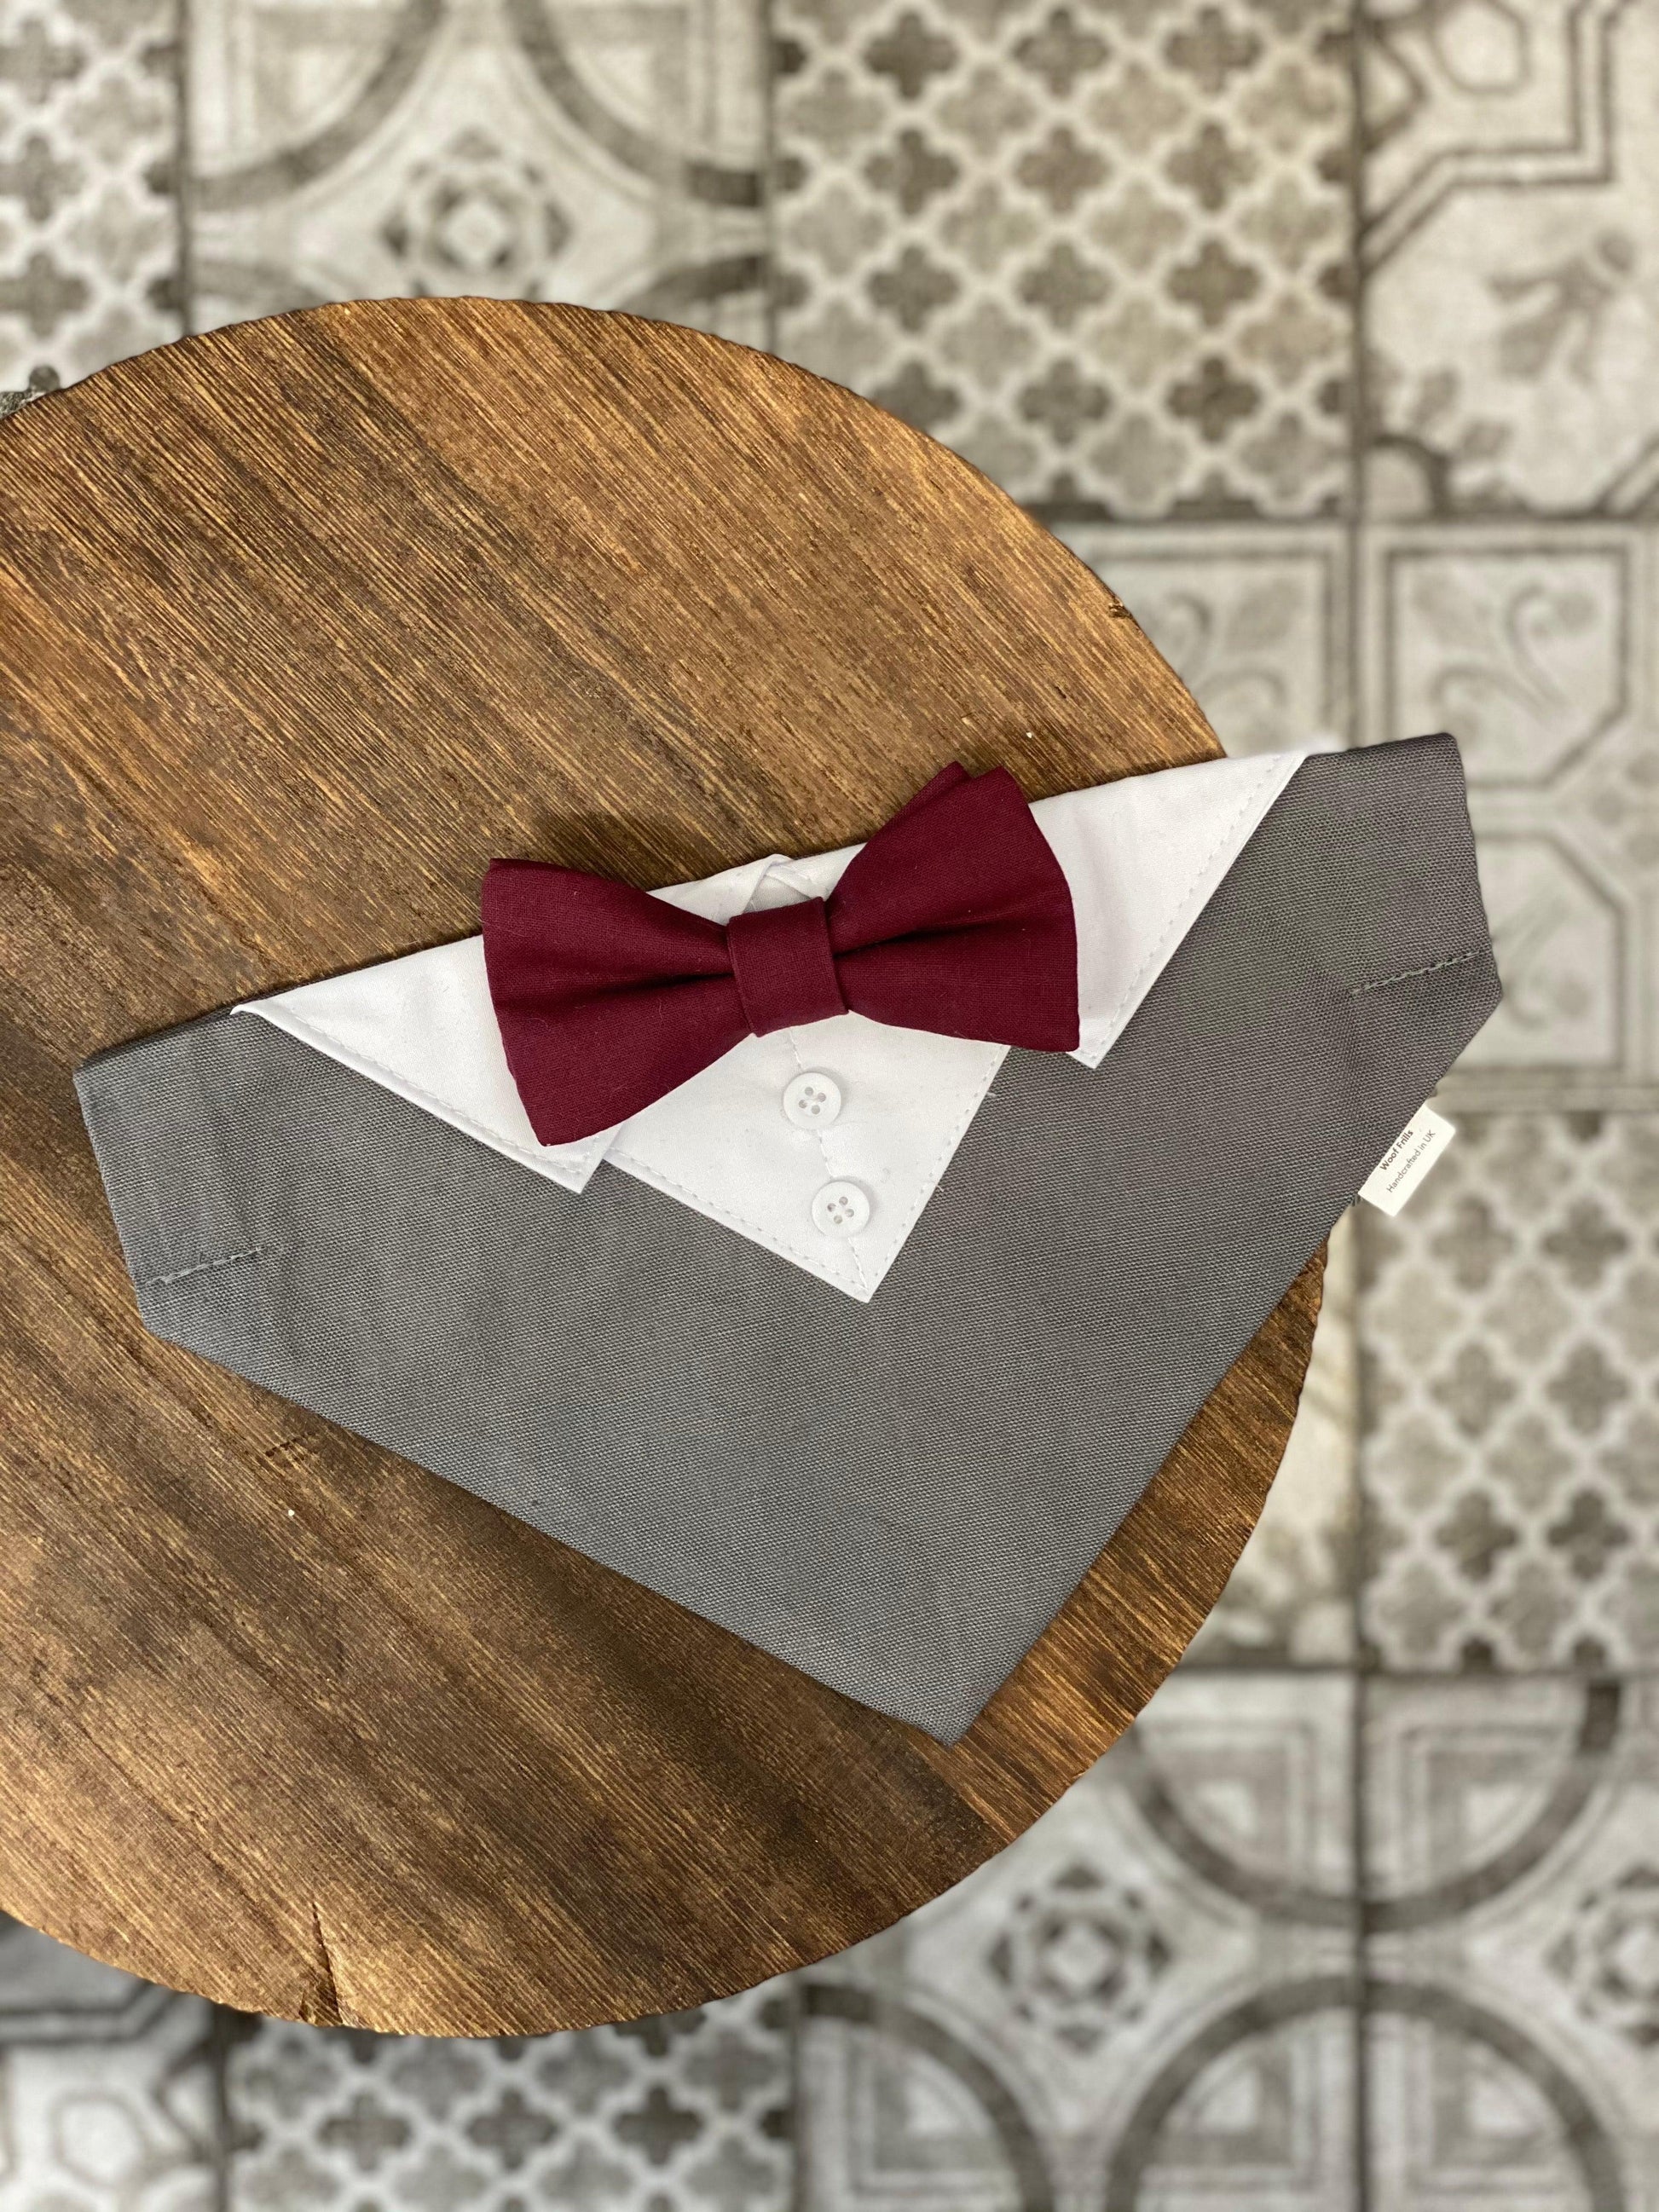 Grey wedding tuxedo with bow tie of your choice - Woof Frills